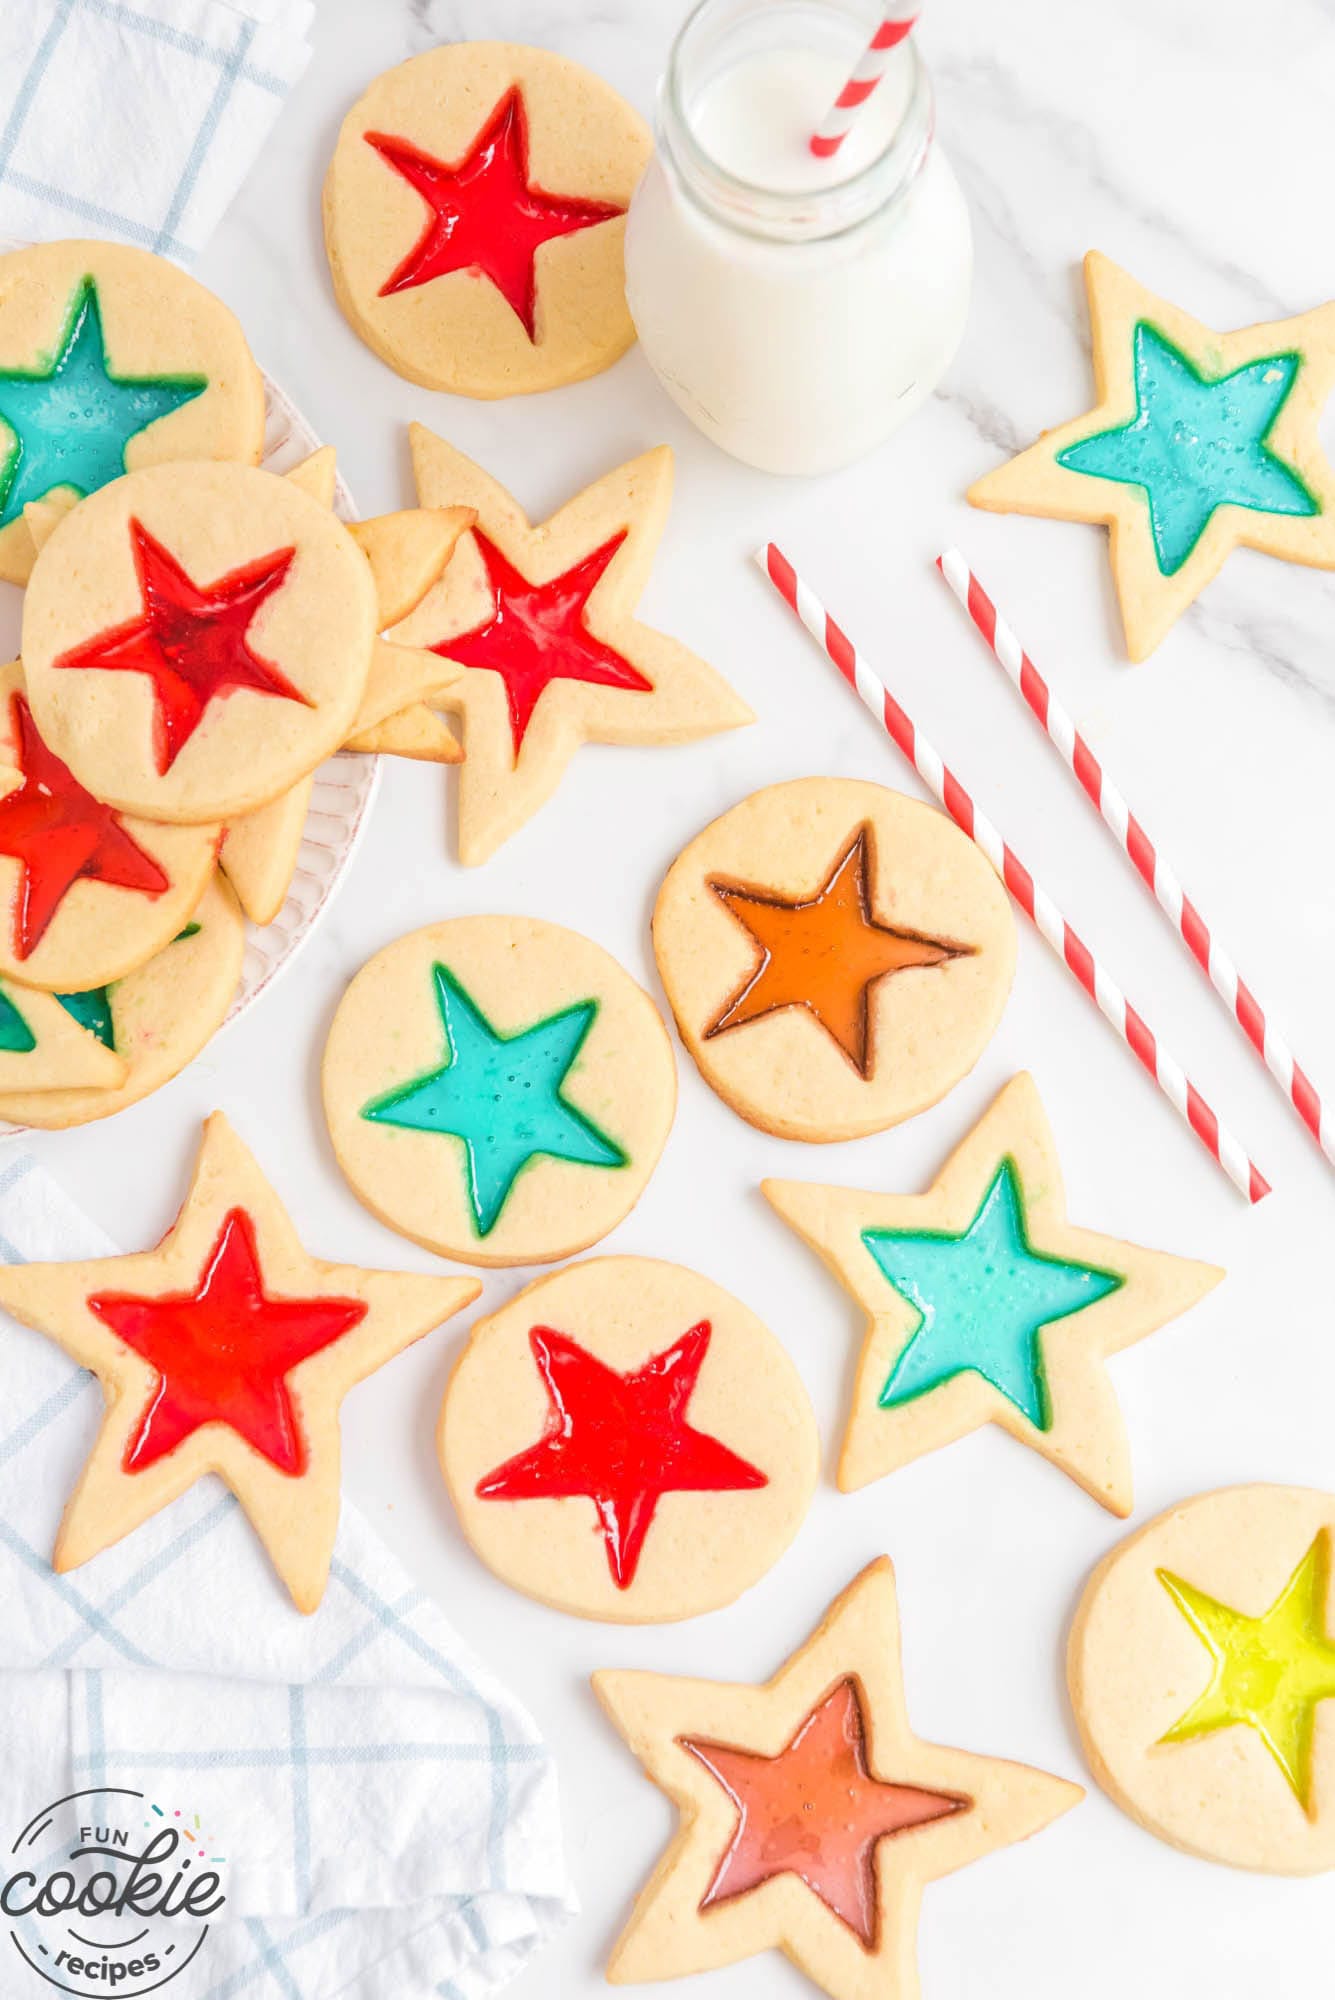 cookies cut out with stained glass stars on a counter next to a jar of milk and red and white striped straws.